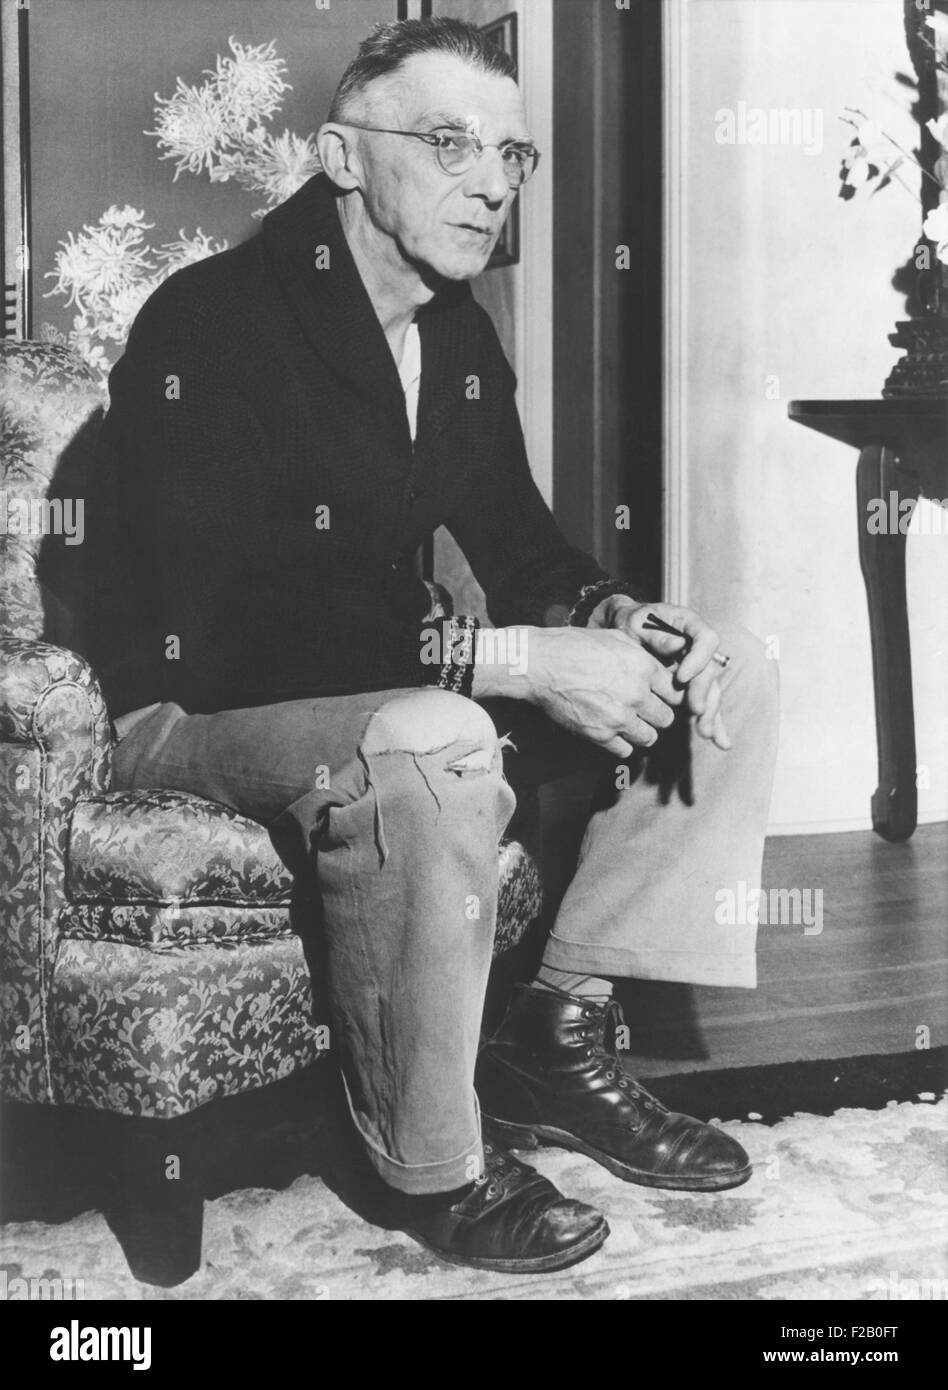 Gen. Joseph Stillwell on leave from his World War II Asian Command, in China, Burma, and India. May 8, 1943. Relaxing at home, he posed for press photographers in a sweater, torn slacks, and scuffed shoes. (CSU 2015 9 1151) Stock Photo